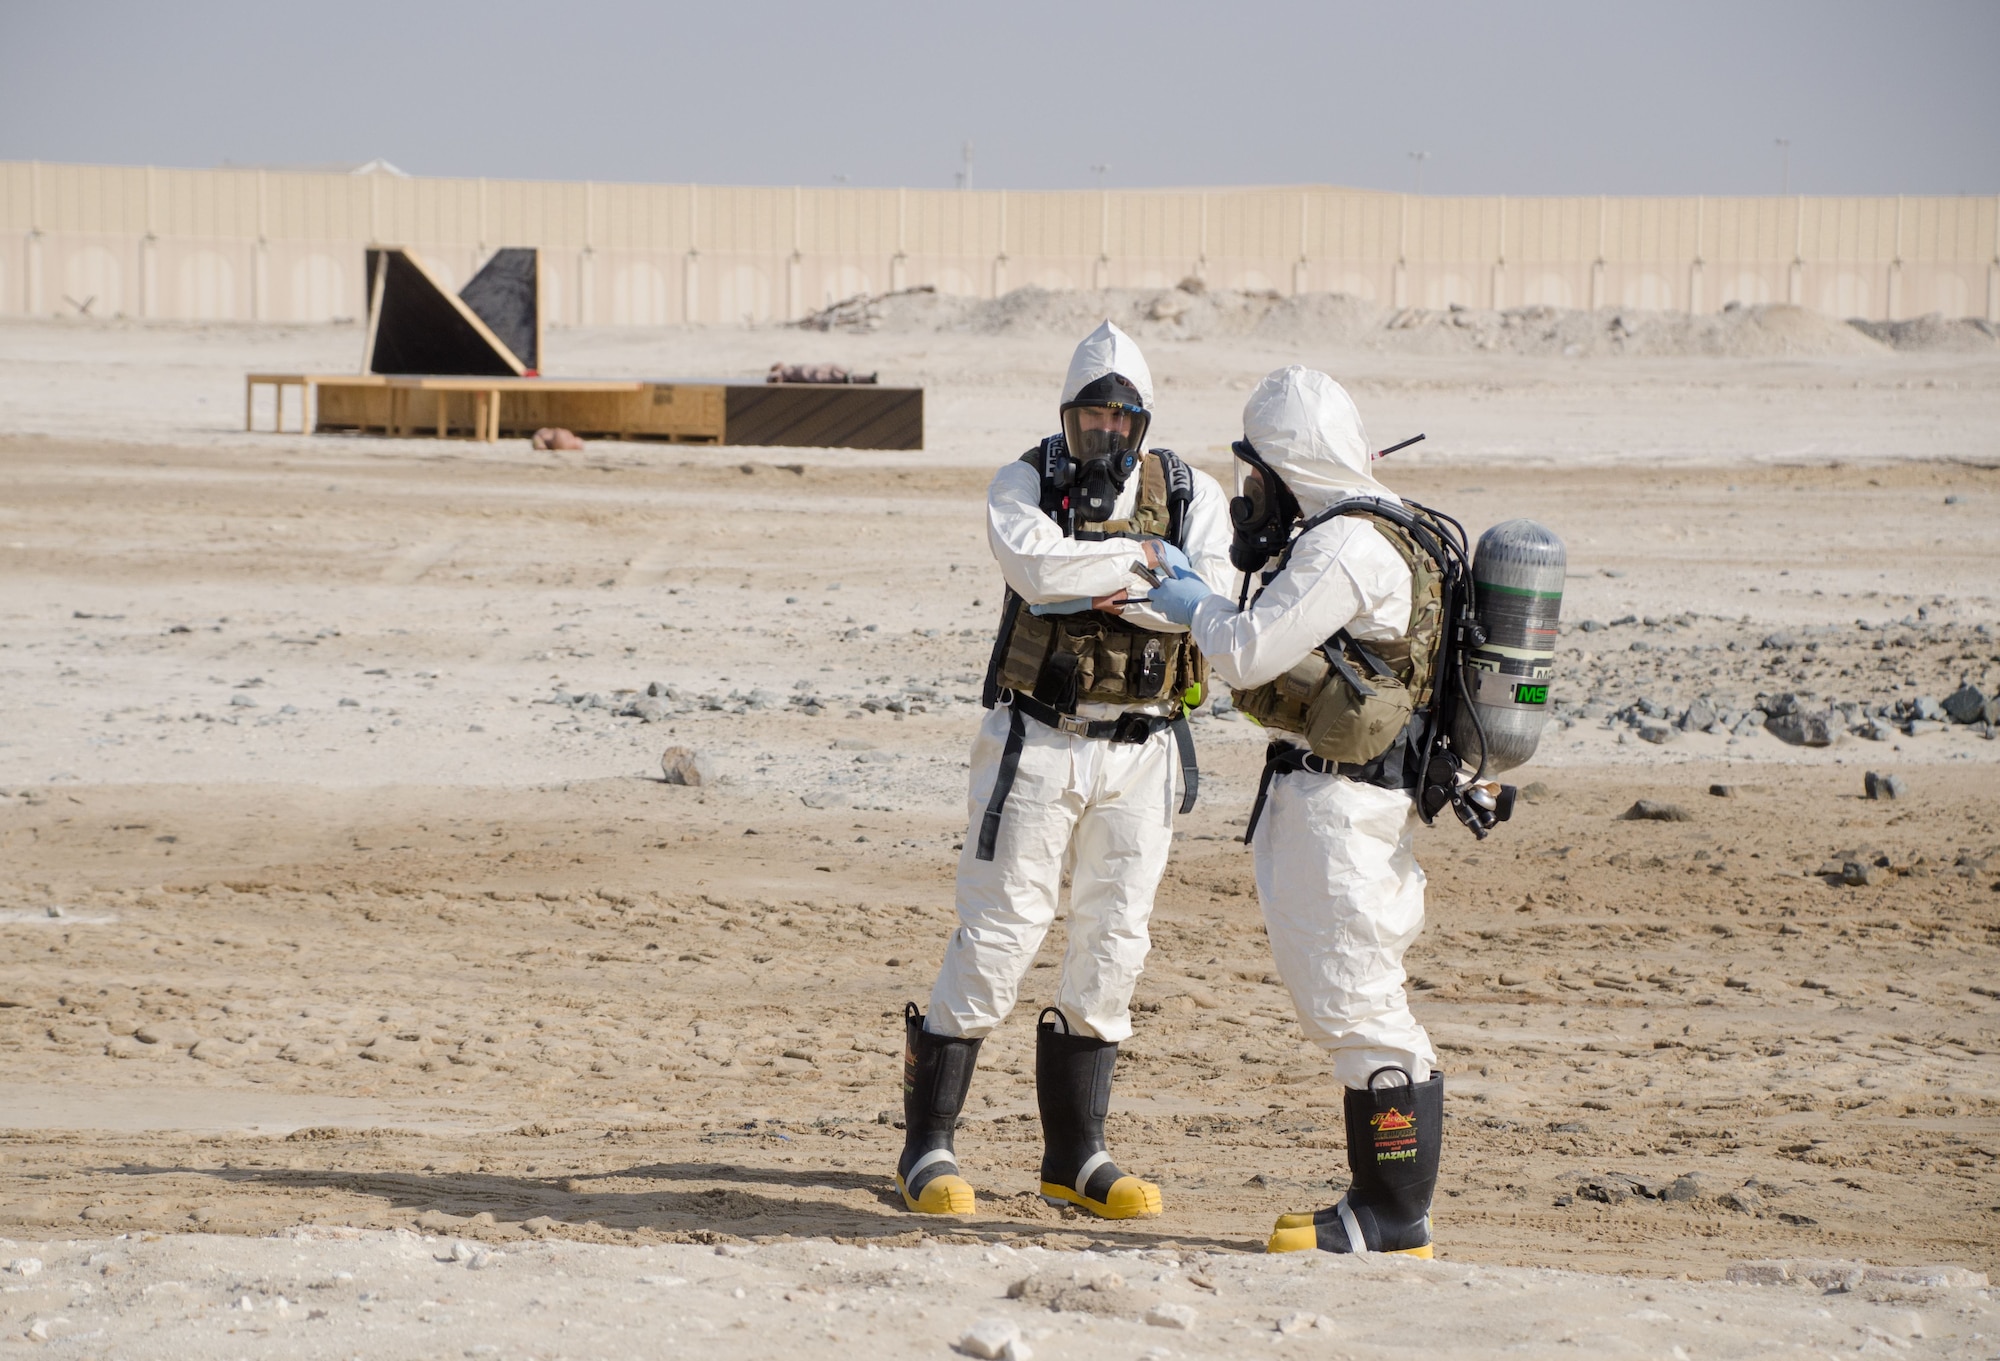 The 380th Expeditionary Civil Engineering Squadron, explosive ordnance disposal technicians, participates in a base-wide Major Accident Response Exercise to test and evaluate their procedures as first responders at Al Dhafra Air Base, United Arab Emirates Dec. 15, 2017. The MARE involved an F-22 Raptor crashing on base; resulting in five injuries and three fatalities. (U.S. Air National Guard Photo by Staff Sgt. Colton Elliott)